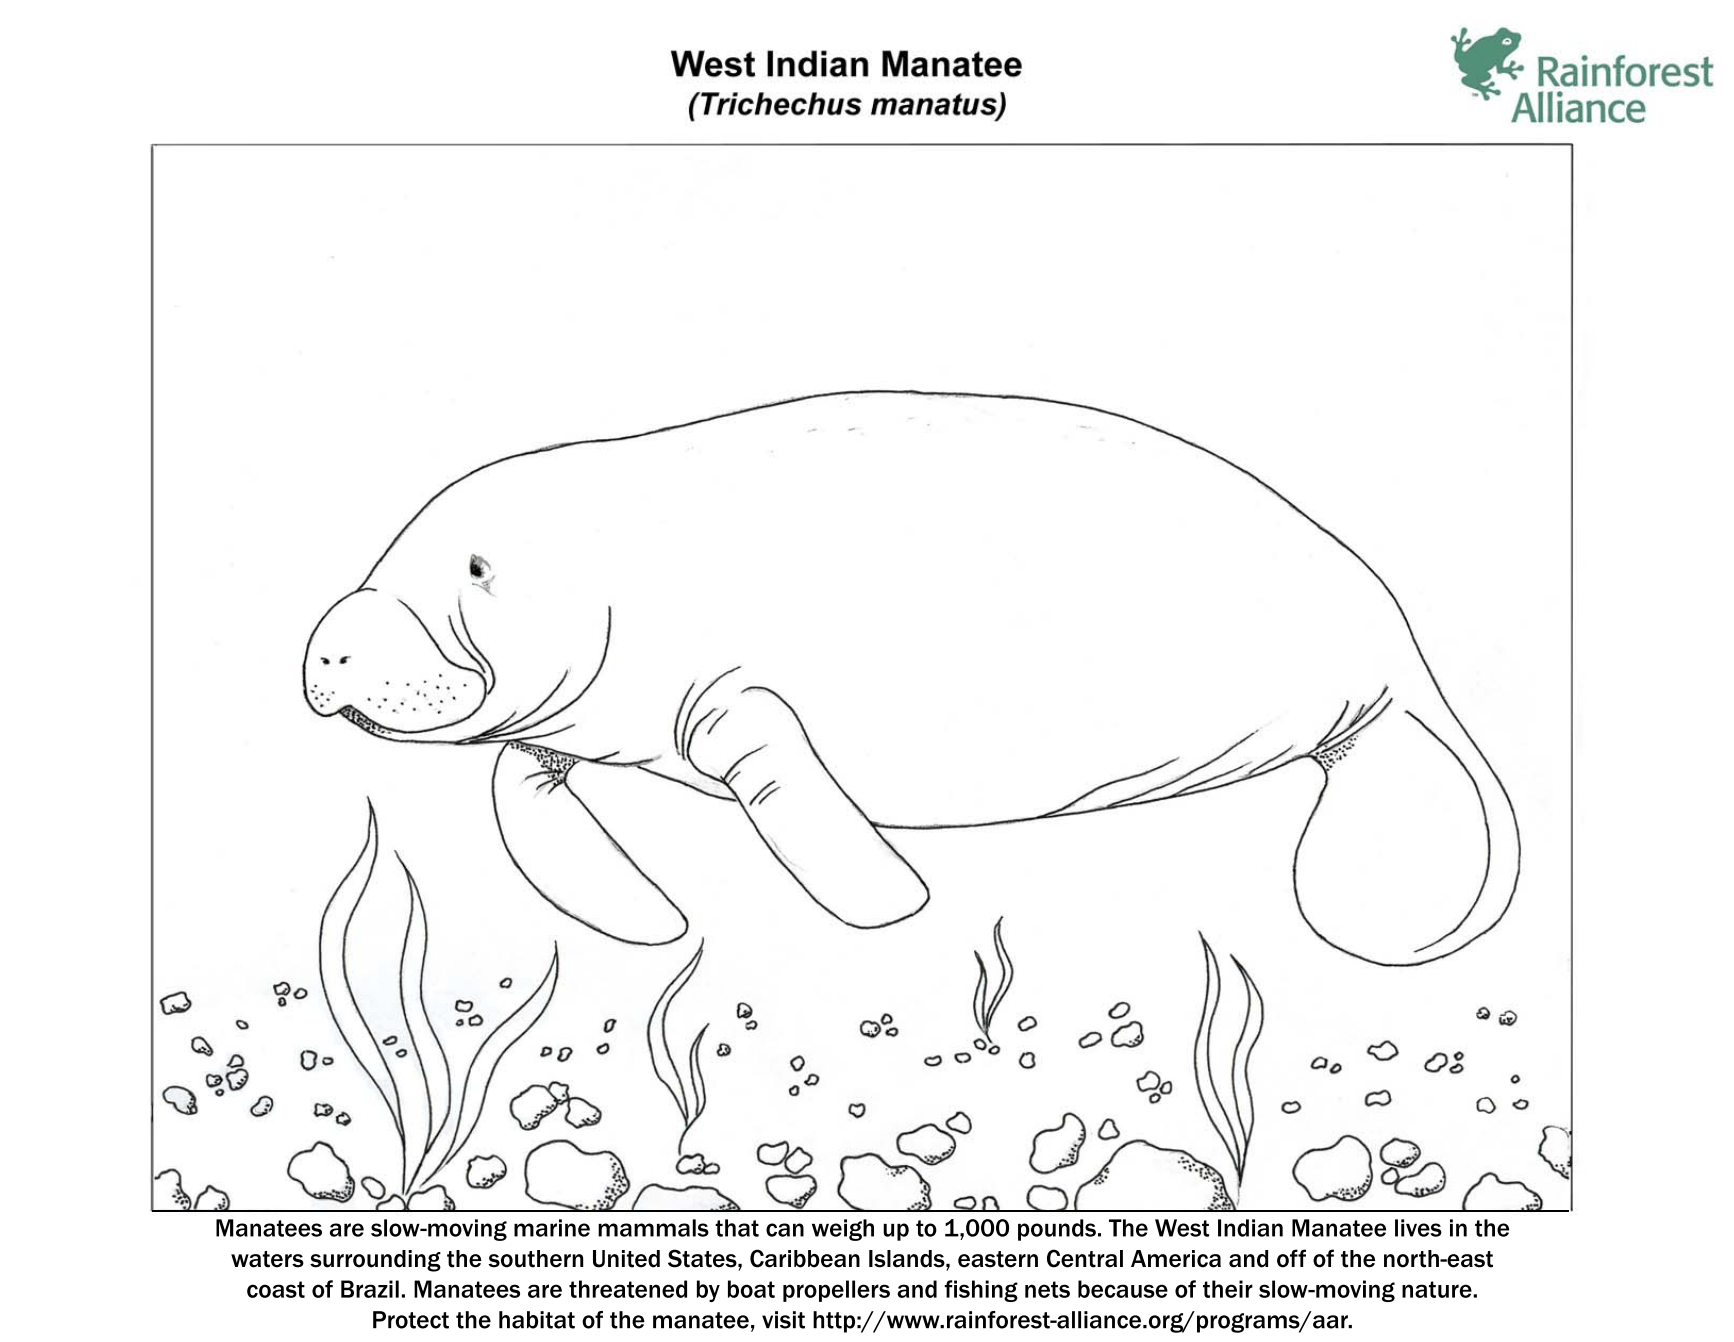 southern coloring pages